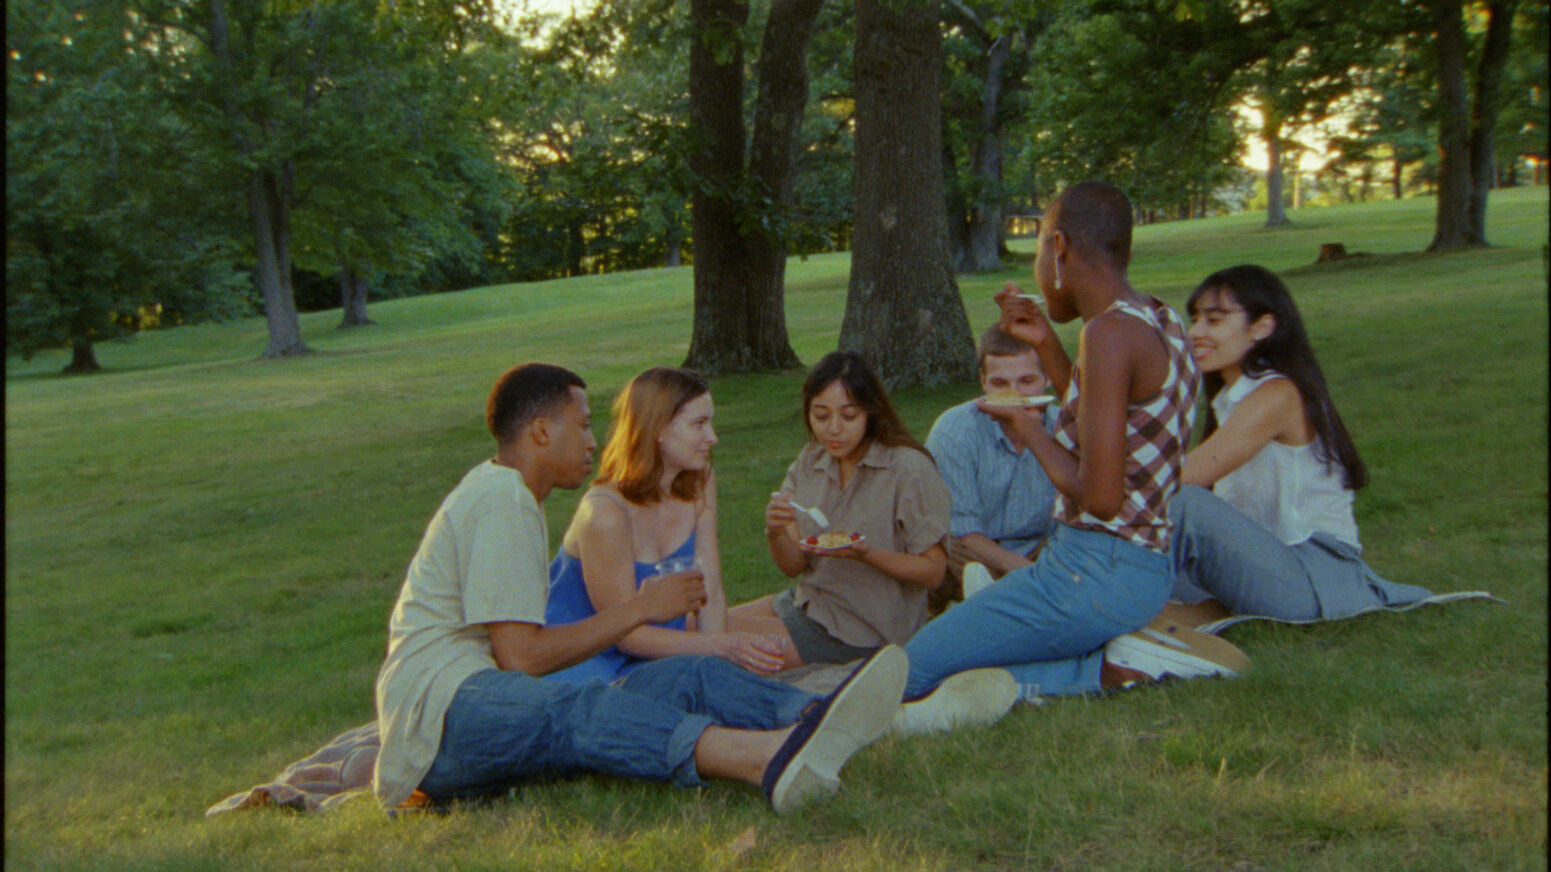 A group of people sit on the grass picnicking happily. 